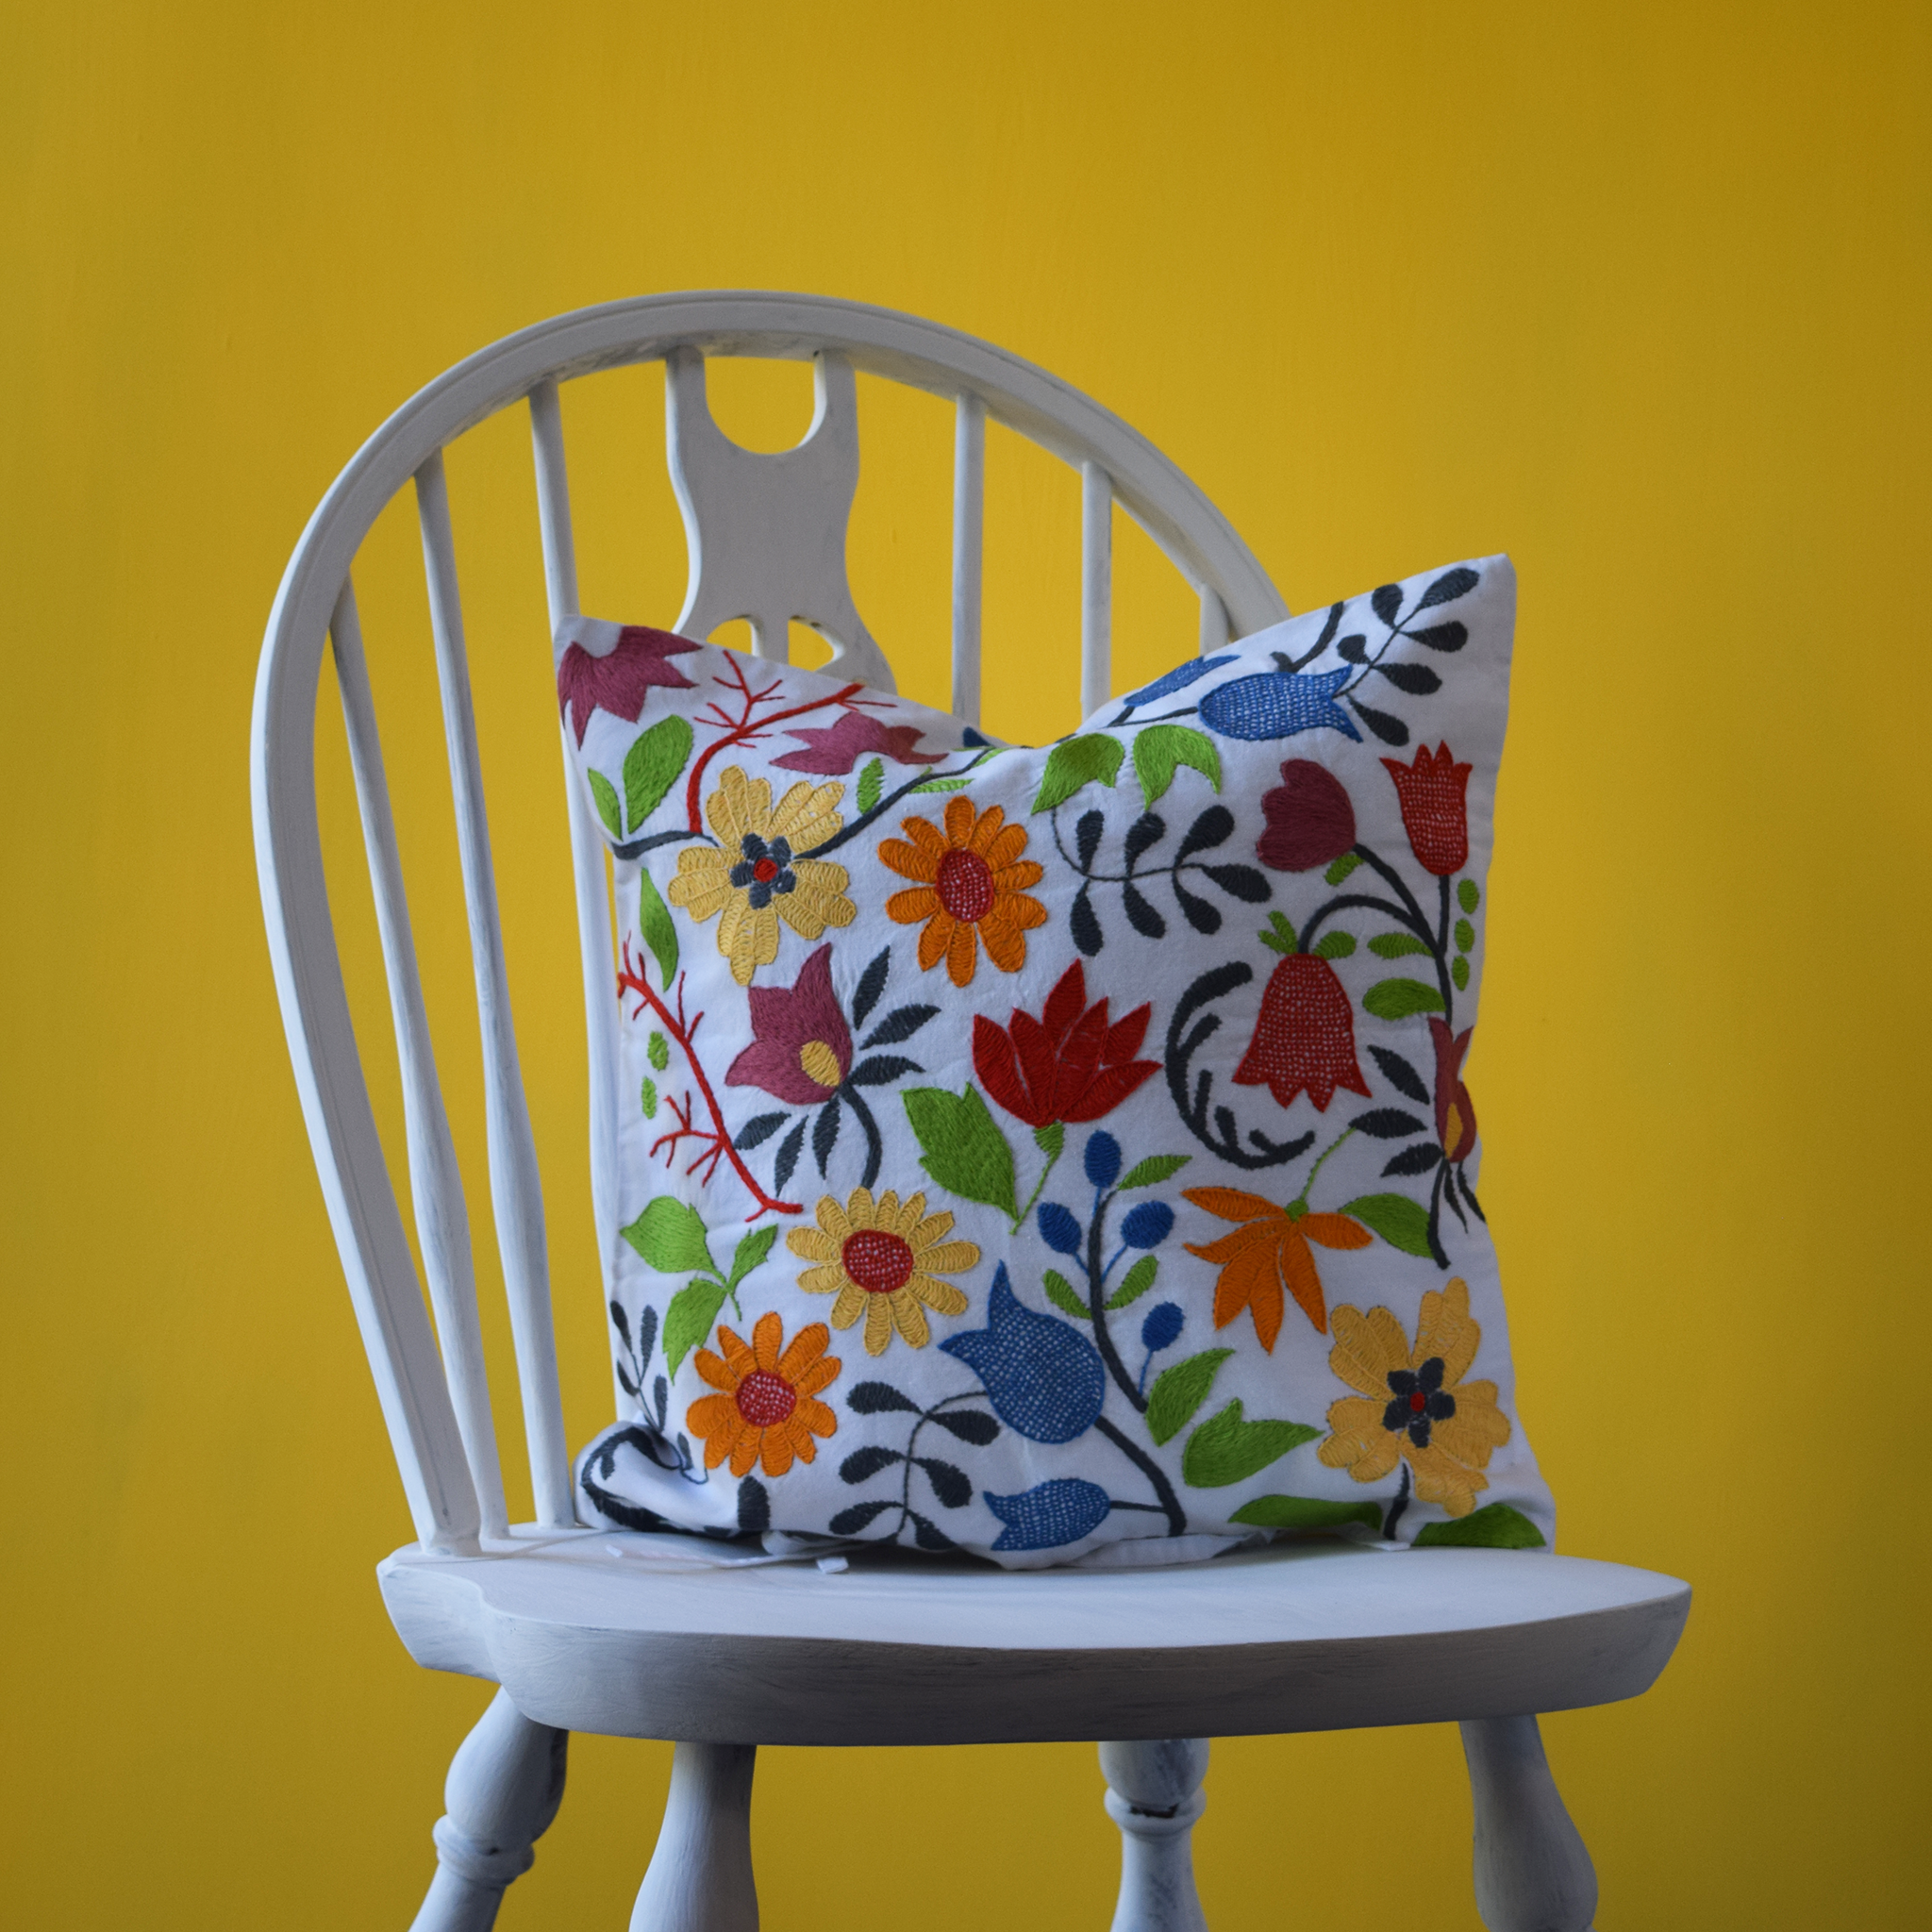 Vibrant Florals, Embroidered Cushion Cover 16" x 16"